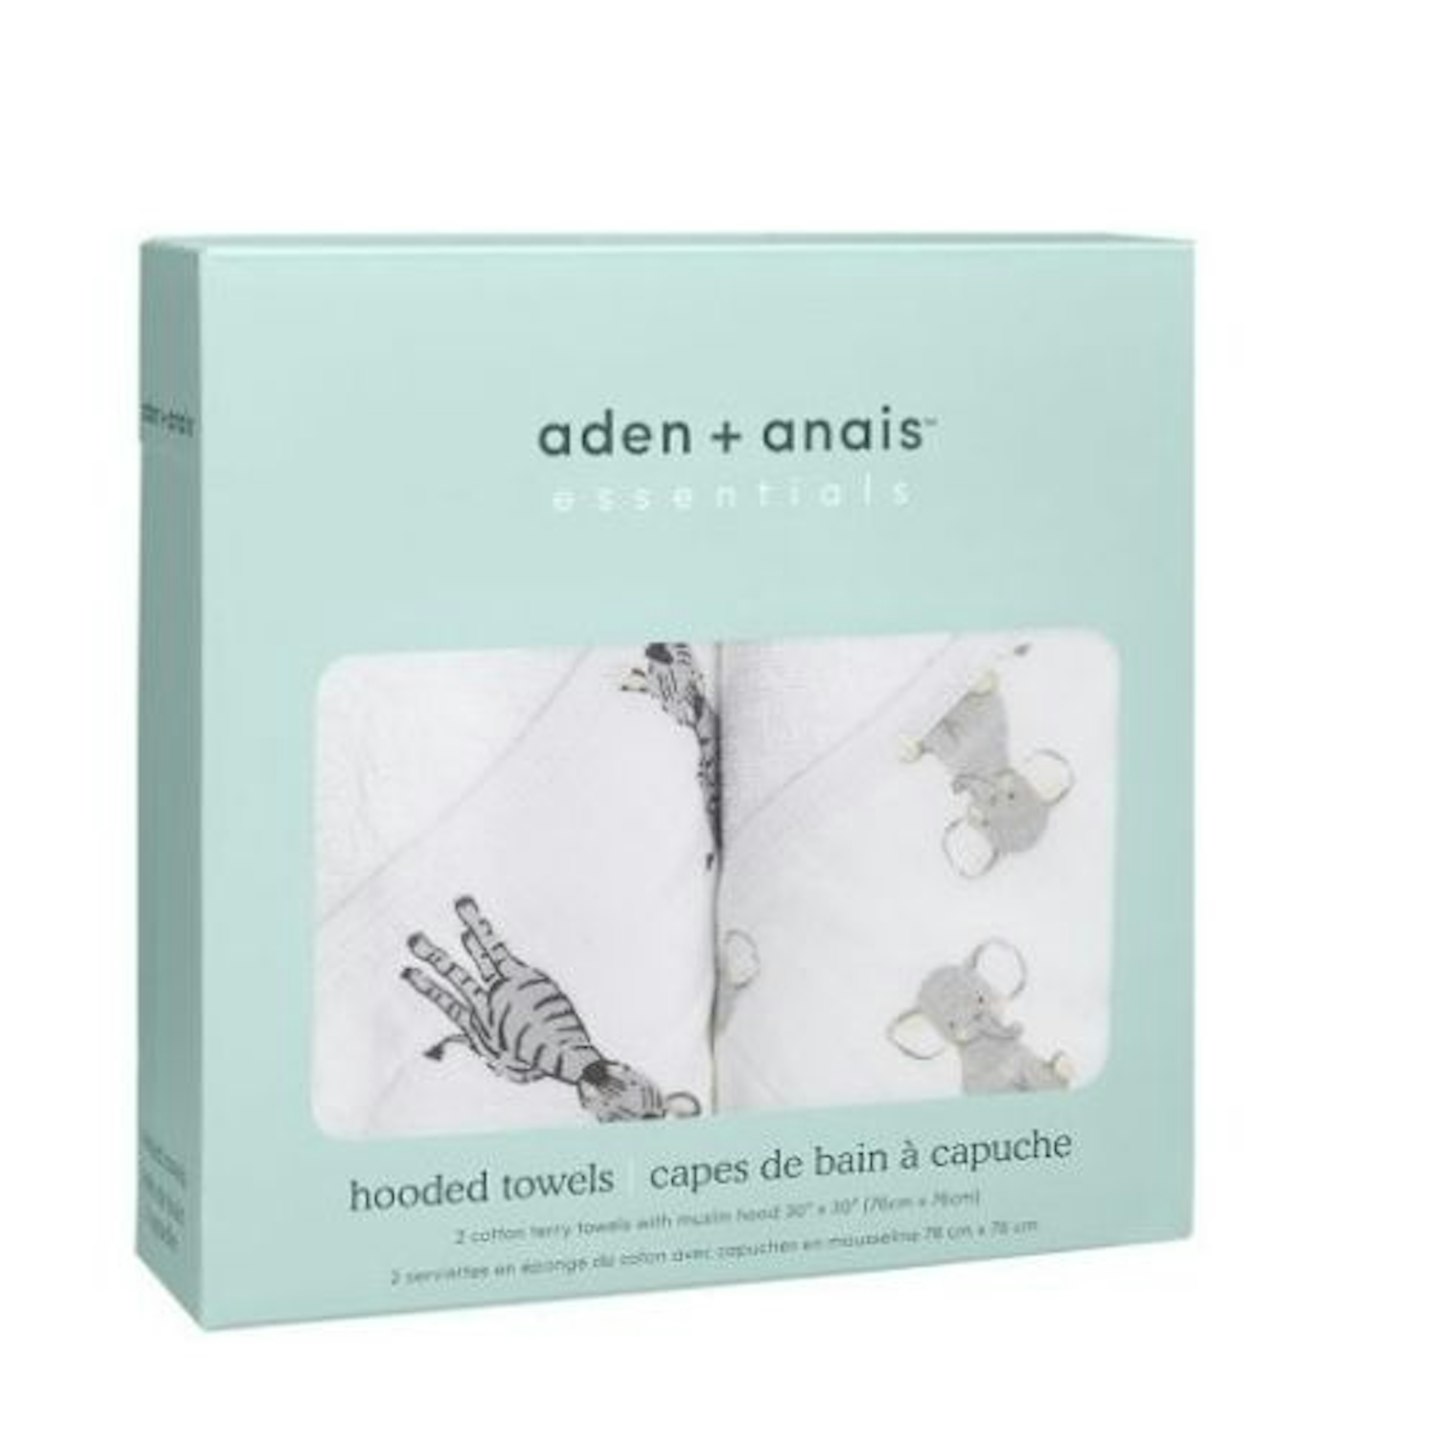 aden + anais essentials Hooded Towel 2-pack 